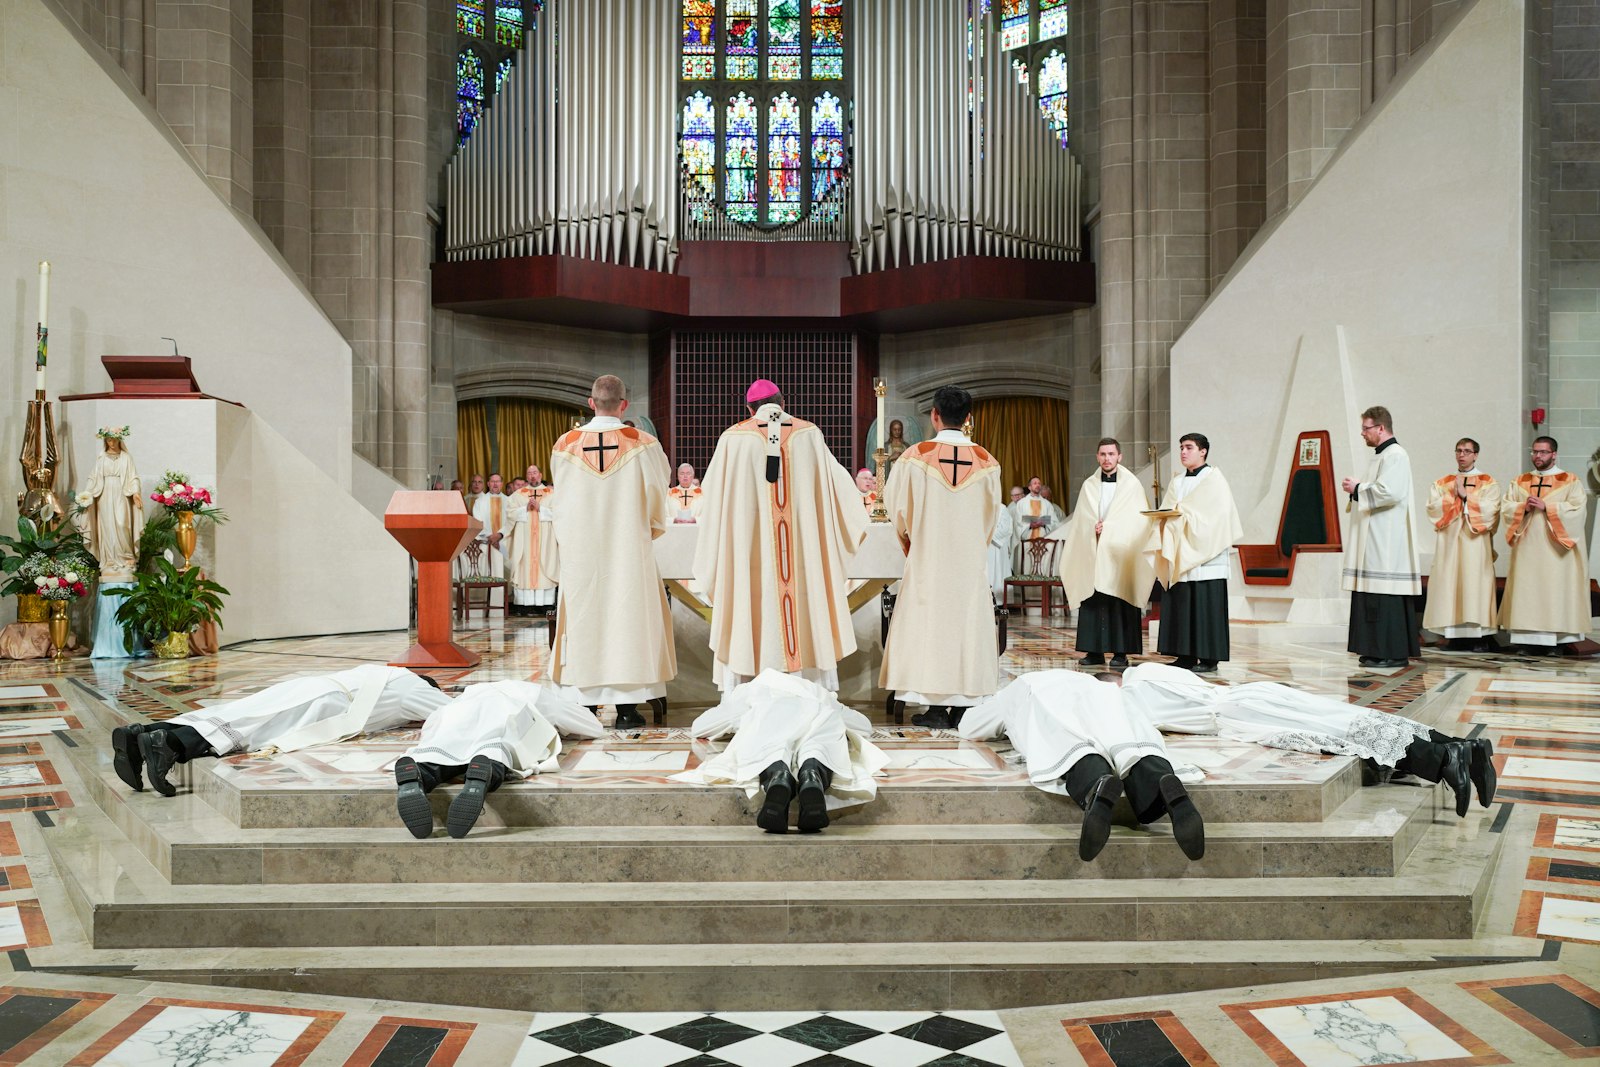 The five met set to be ordained priests lie prostrate during the Litany of Supplication. Archbishop Vigneron told the men during his homily their mission has been set for them since before they were born.